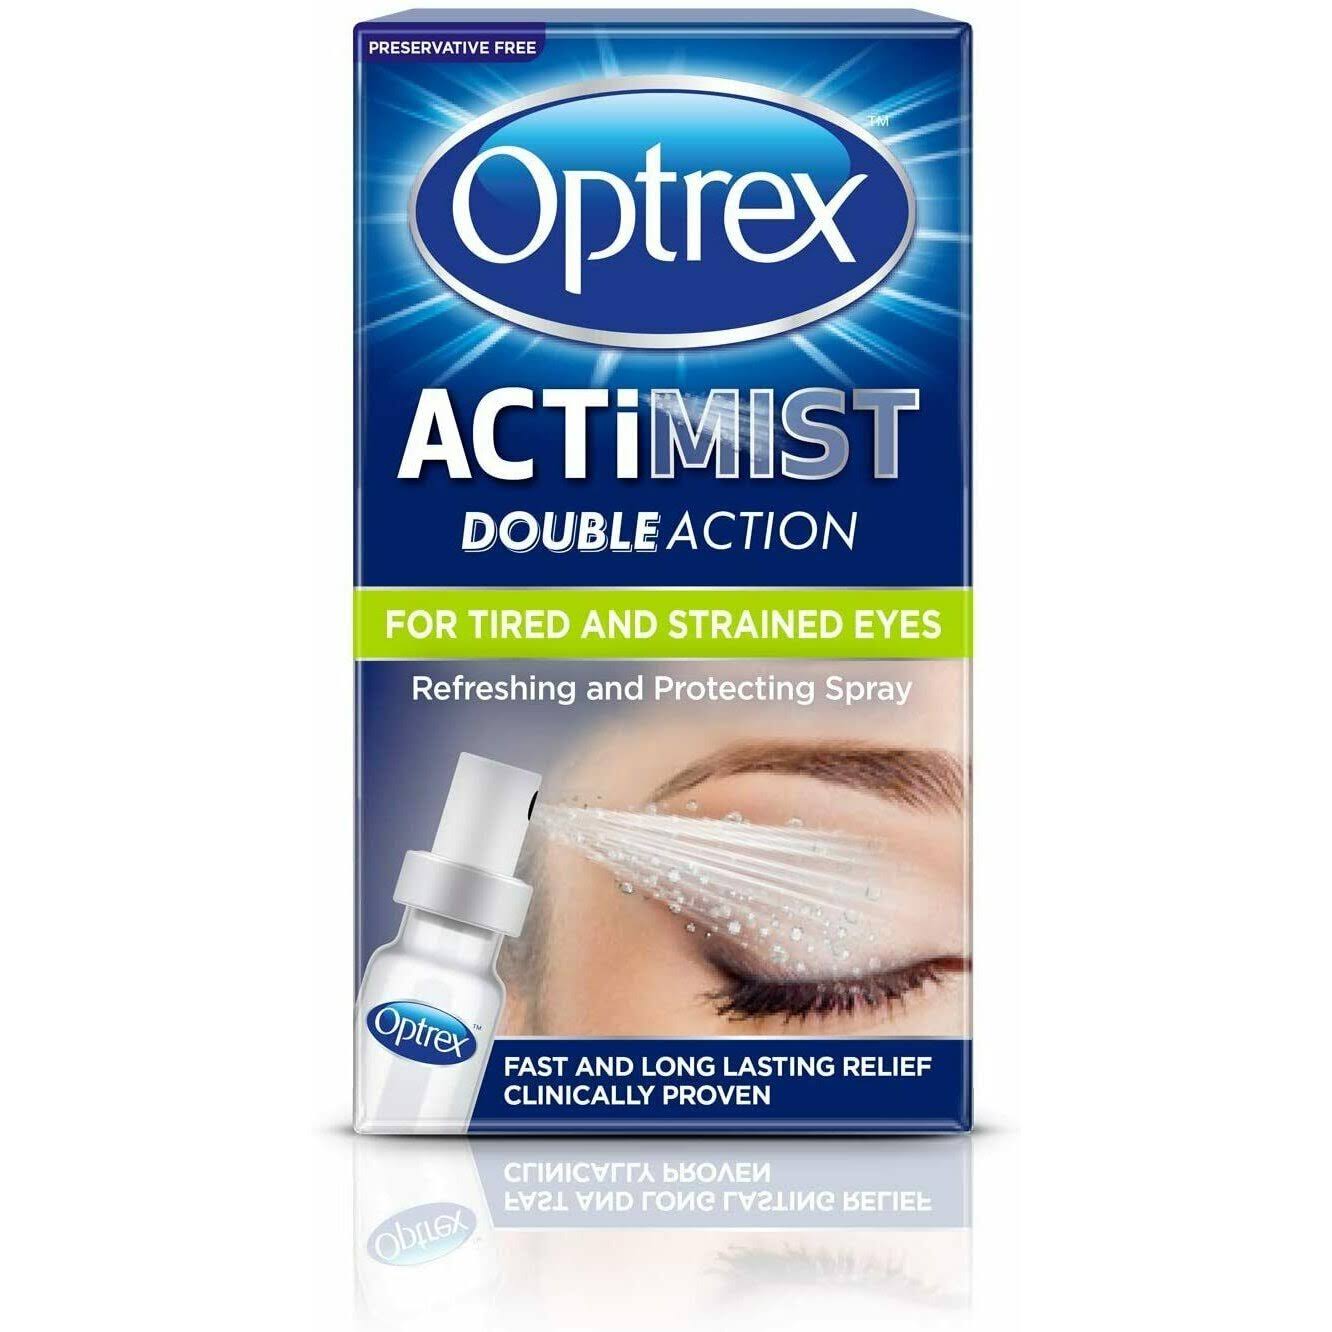 Optrex Double Action Actimist Eye Spray for Tired & Strained Eyes 10ml